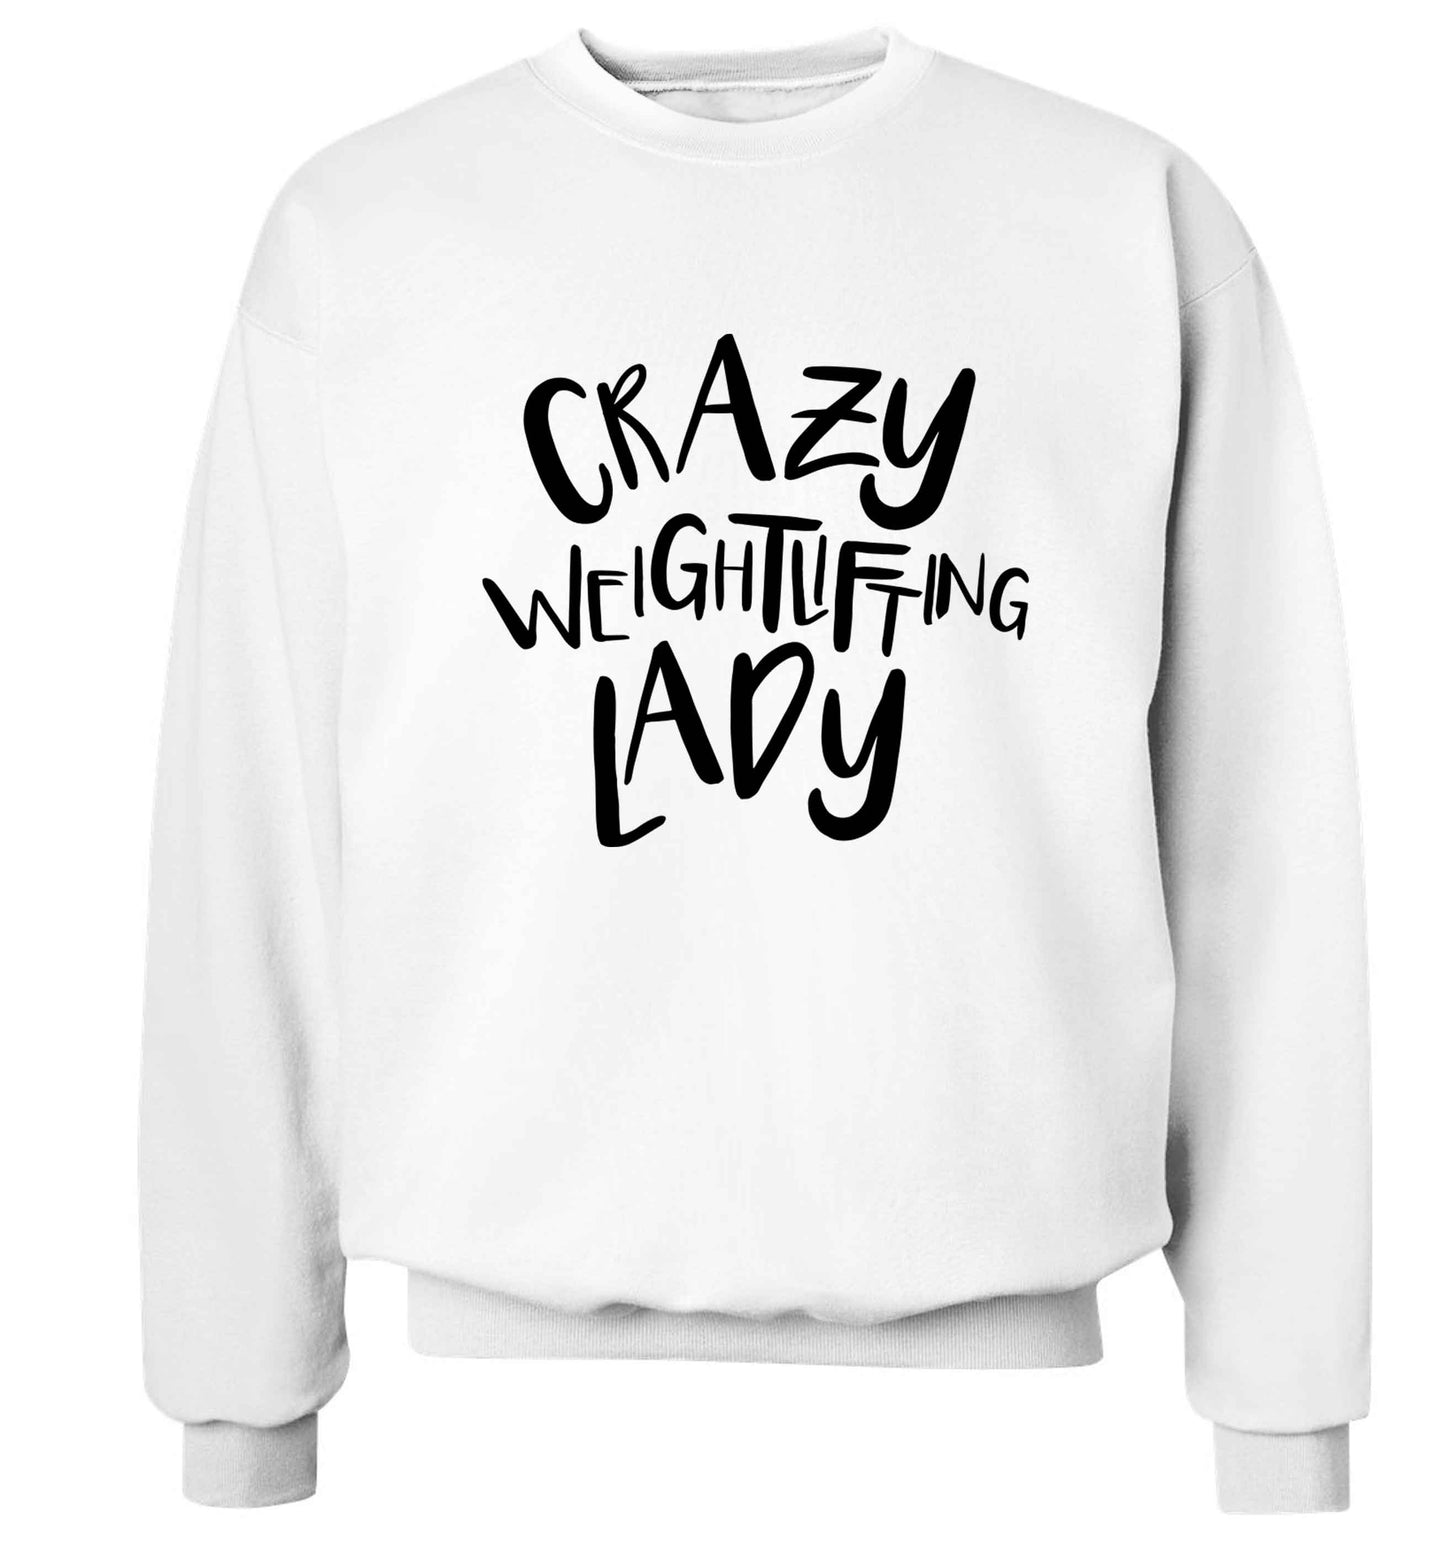 Crazy weightlifting lady Adult's unisex white Sweater 2XL